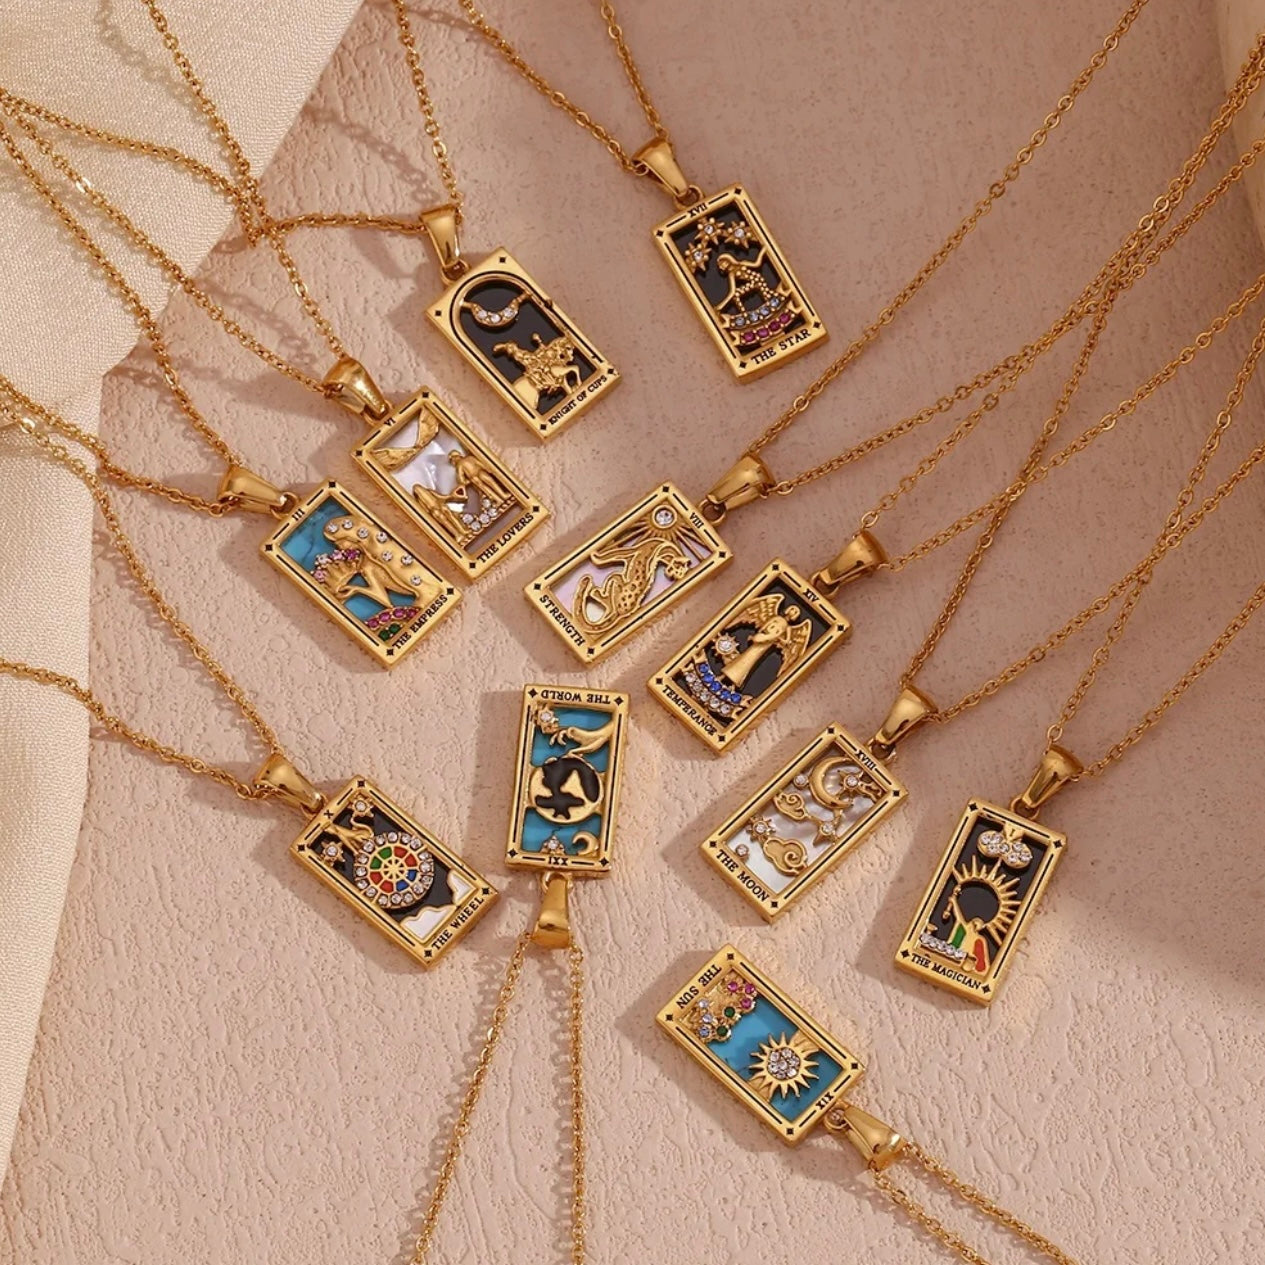 18k Gold Plated Tarot Card Necklace - The Lovers